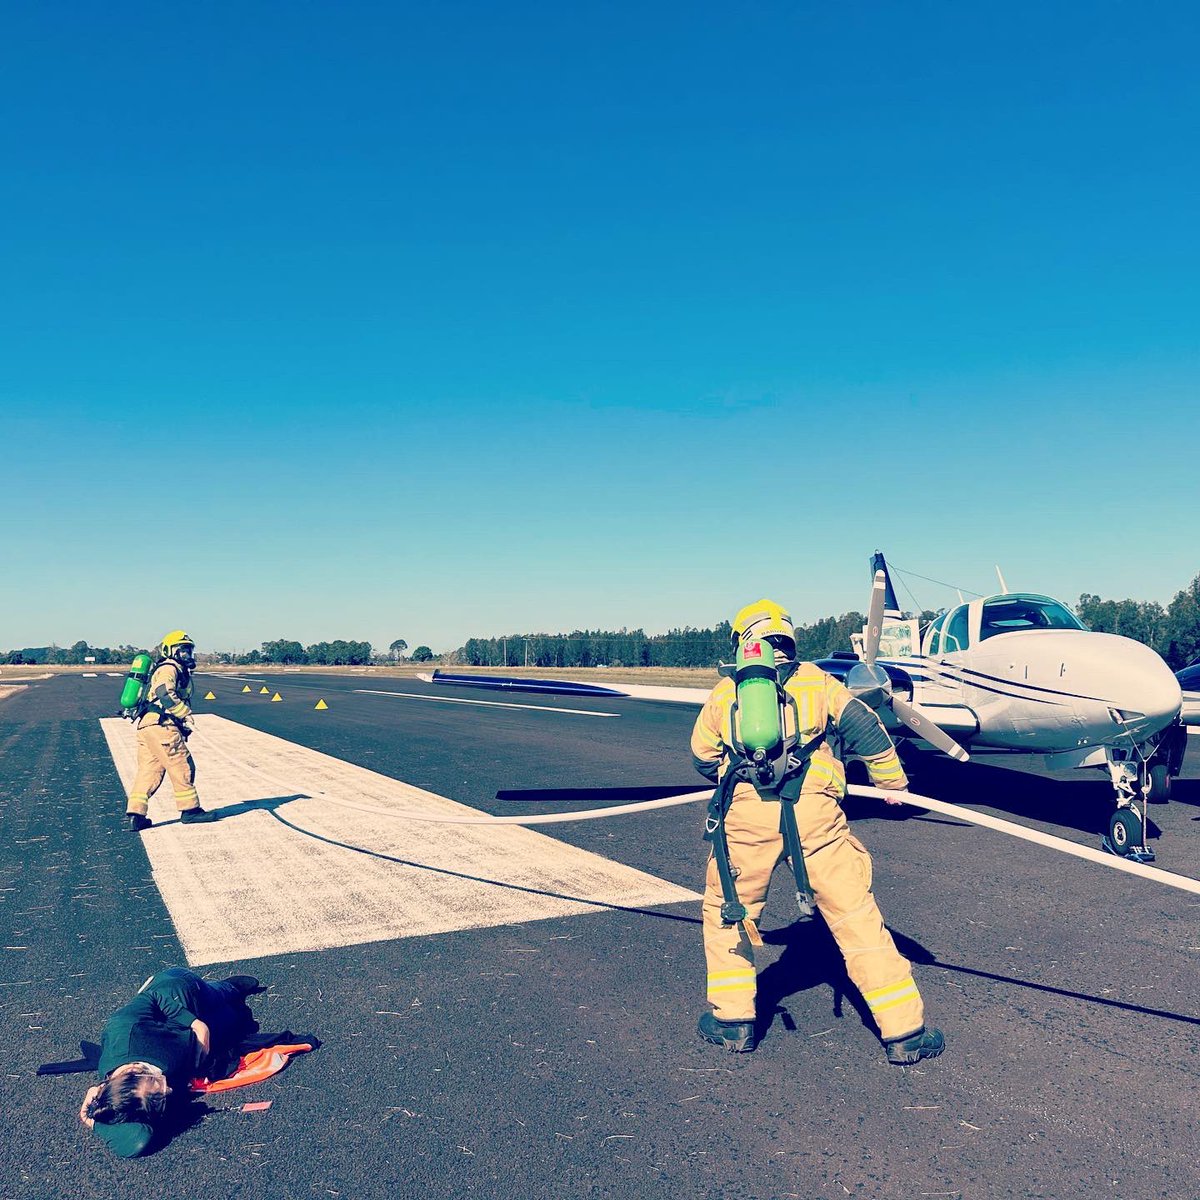 Working in community disaster #recovery one day, to airplane #disaster #simulation the next. Never a dull day with @lismorecitycouncil. The level of coordination between @nswpolice, @nswrfs, @fireandrescuensw, @nswses & @nswambulance was admirable. #yaegl